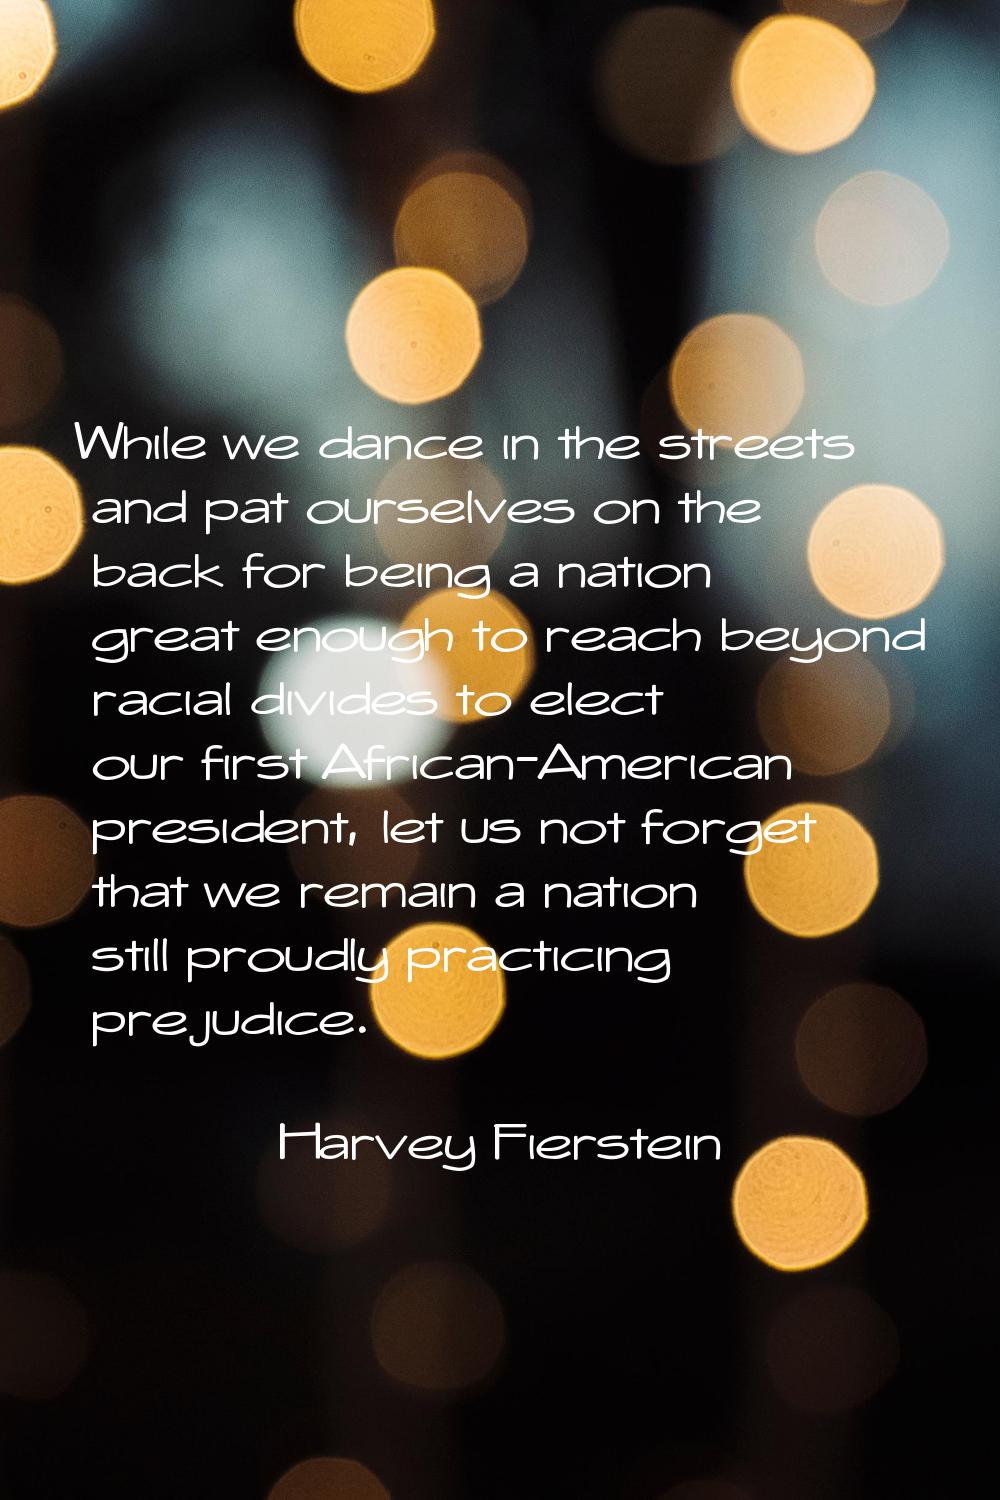 While we dance in the streets and pat ourselves on the back for being a nation great enough to reac